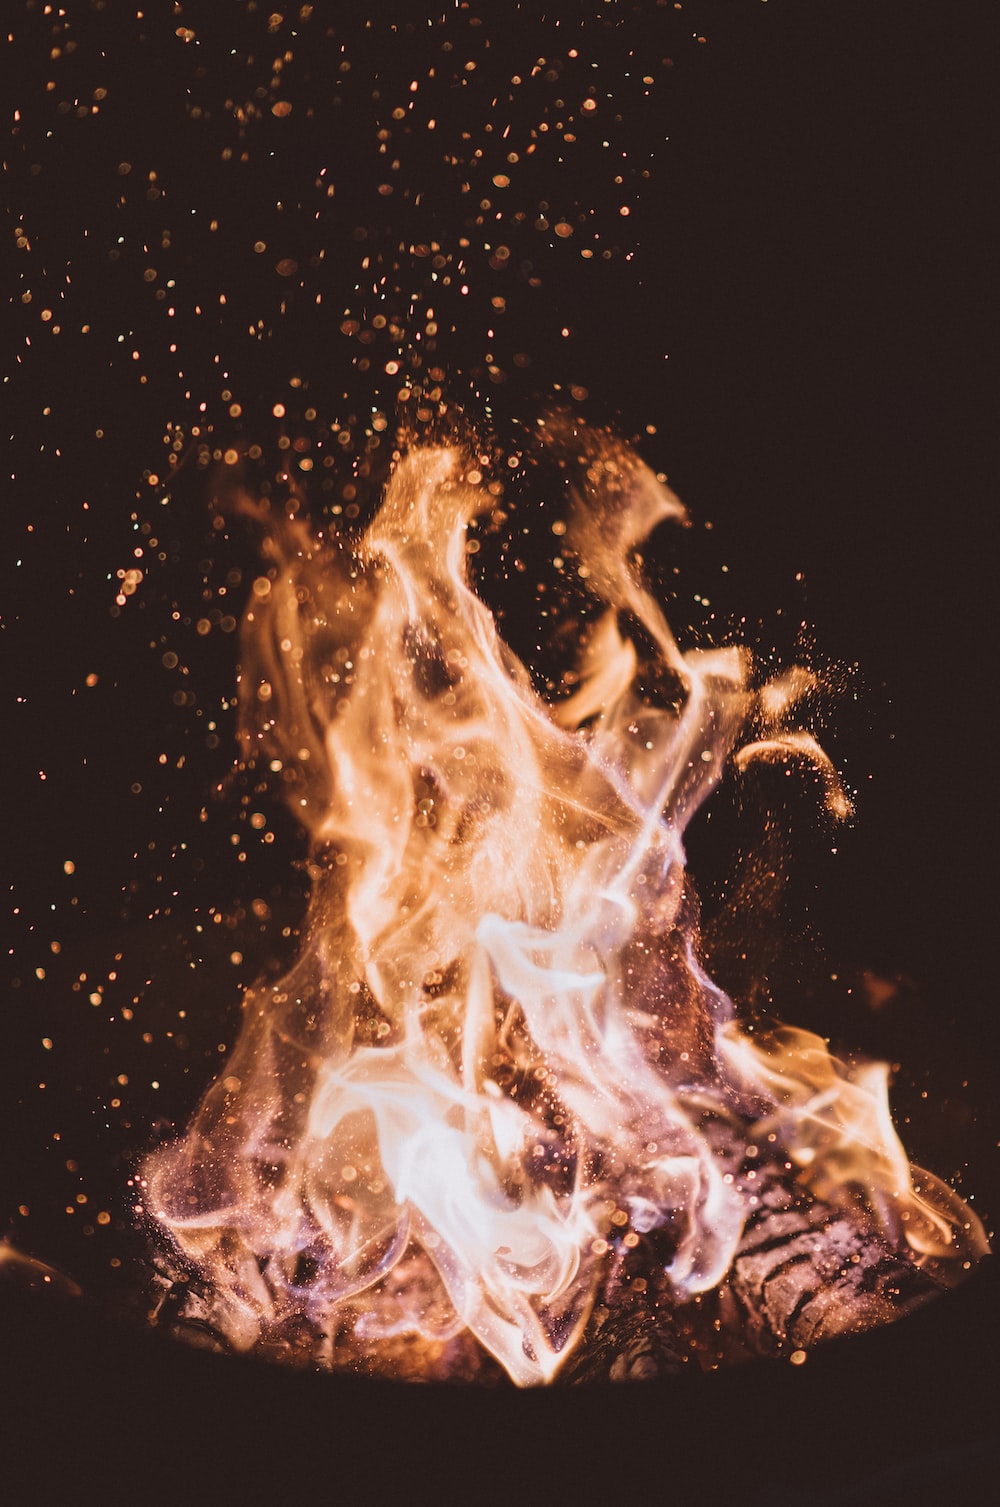 Winter Fire Picture. Download Free Image